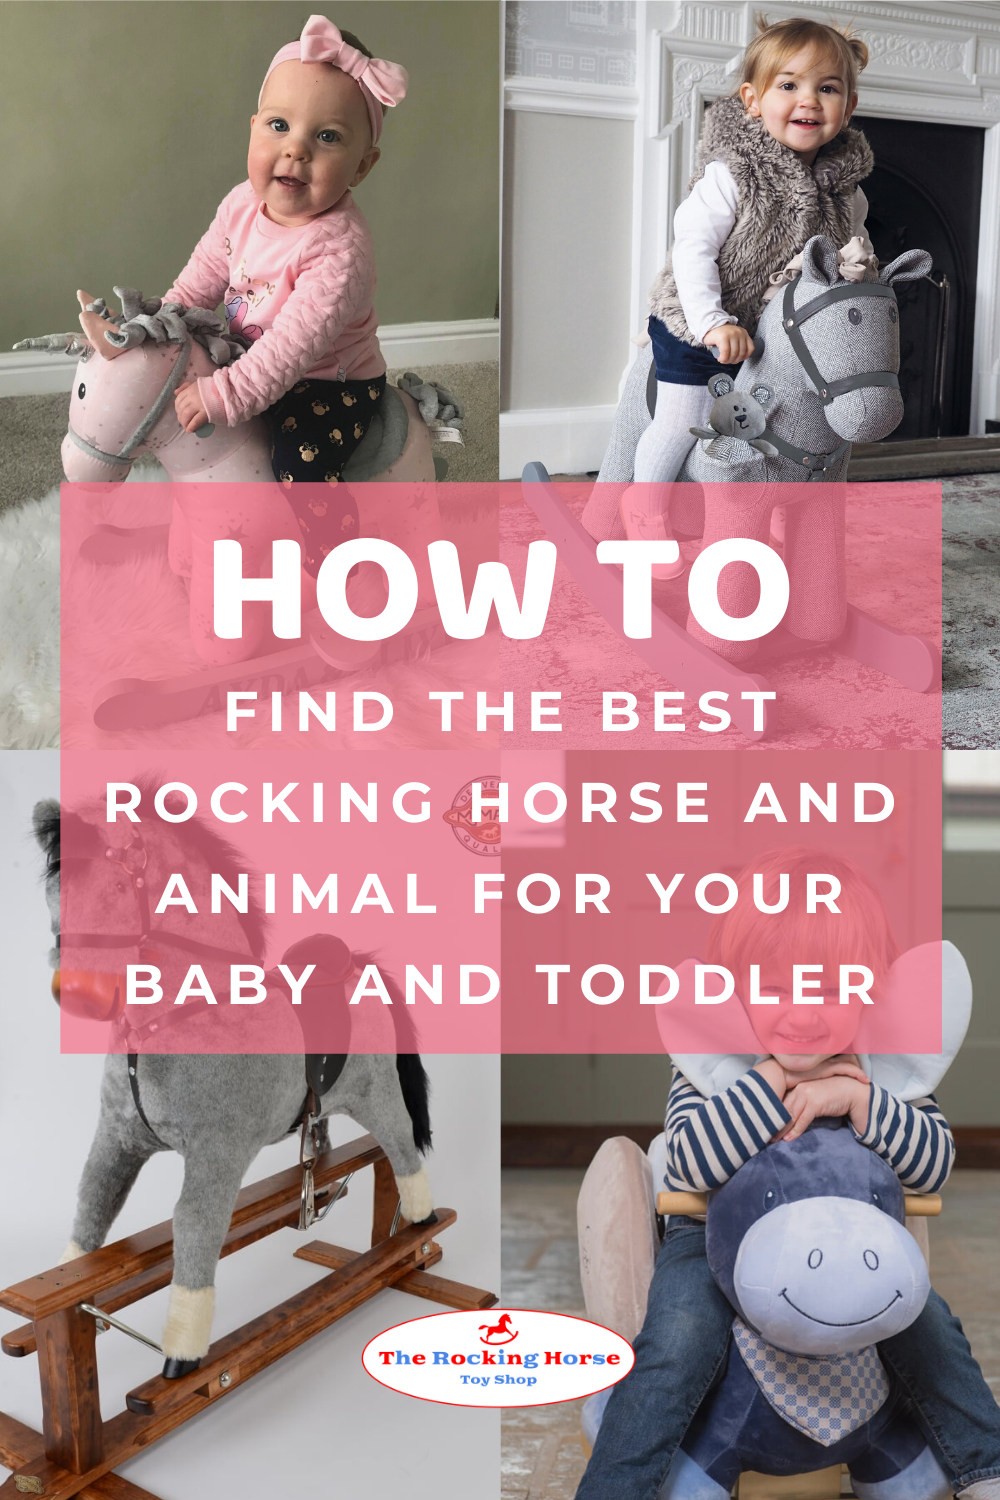 How to choose the best rocking horse and animal for your baby and toddler